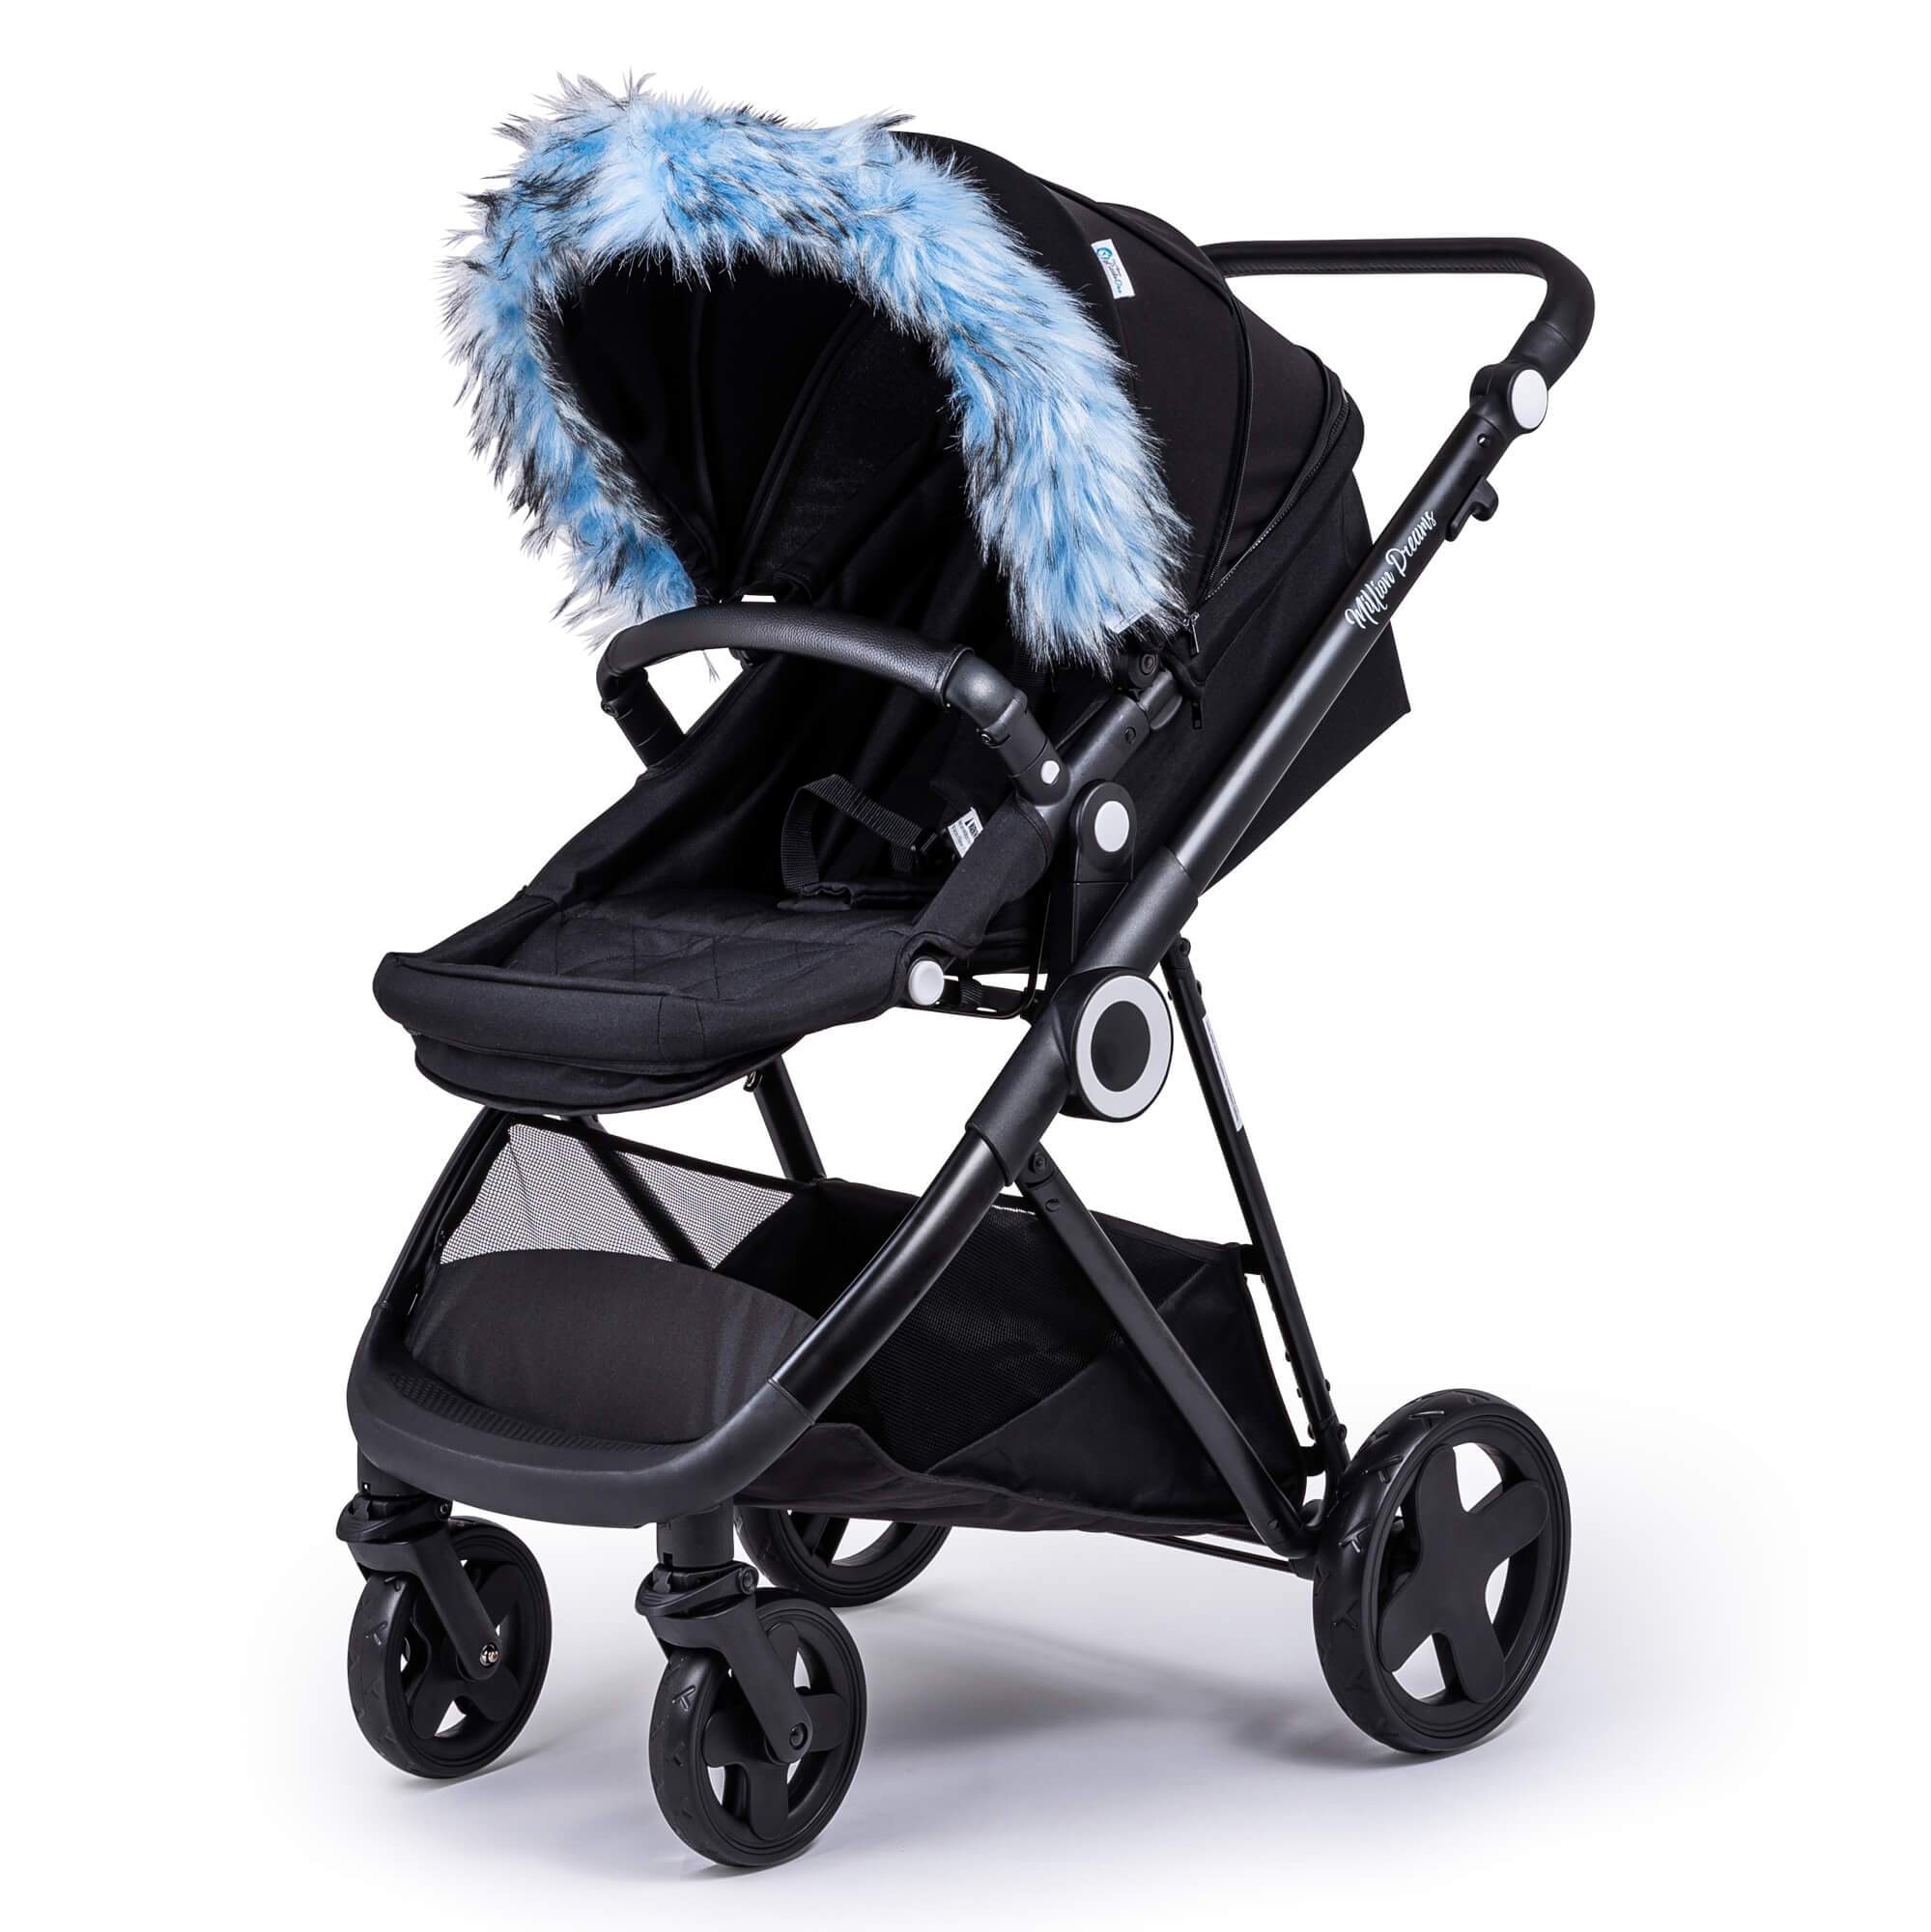 Pram Fur Hood Trim Attachment for Pushchair Compatible with Concord - Light Blue / Fits All Models | For Your Little One